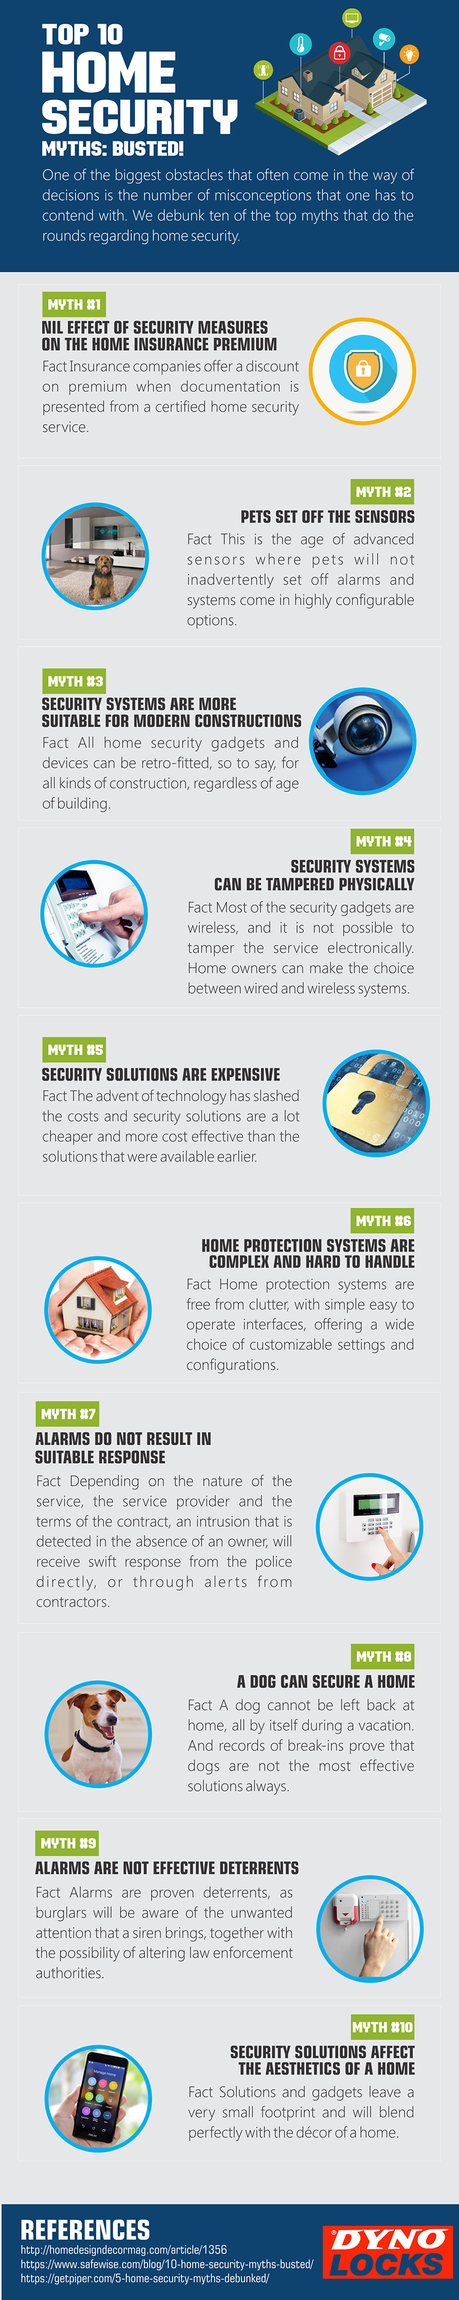 Top 10 Home Security Myths Busted: Busted!